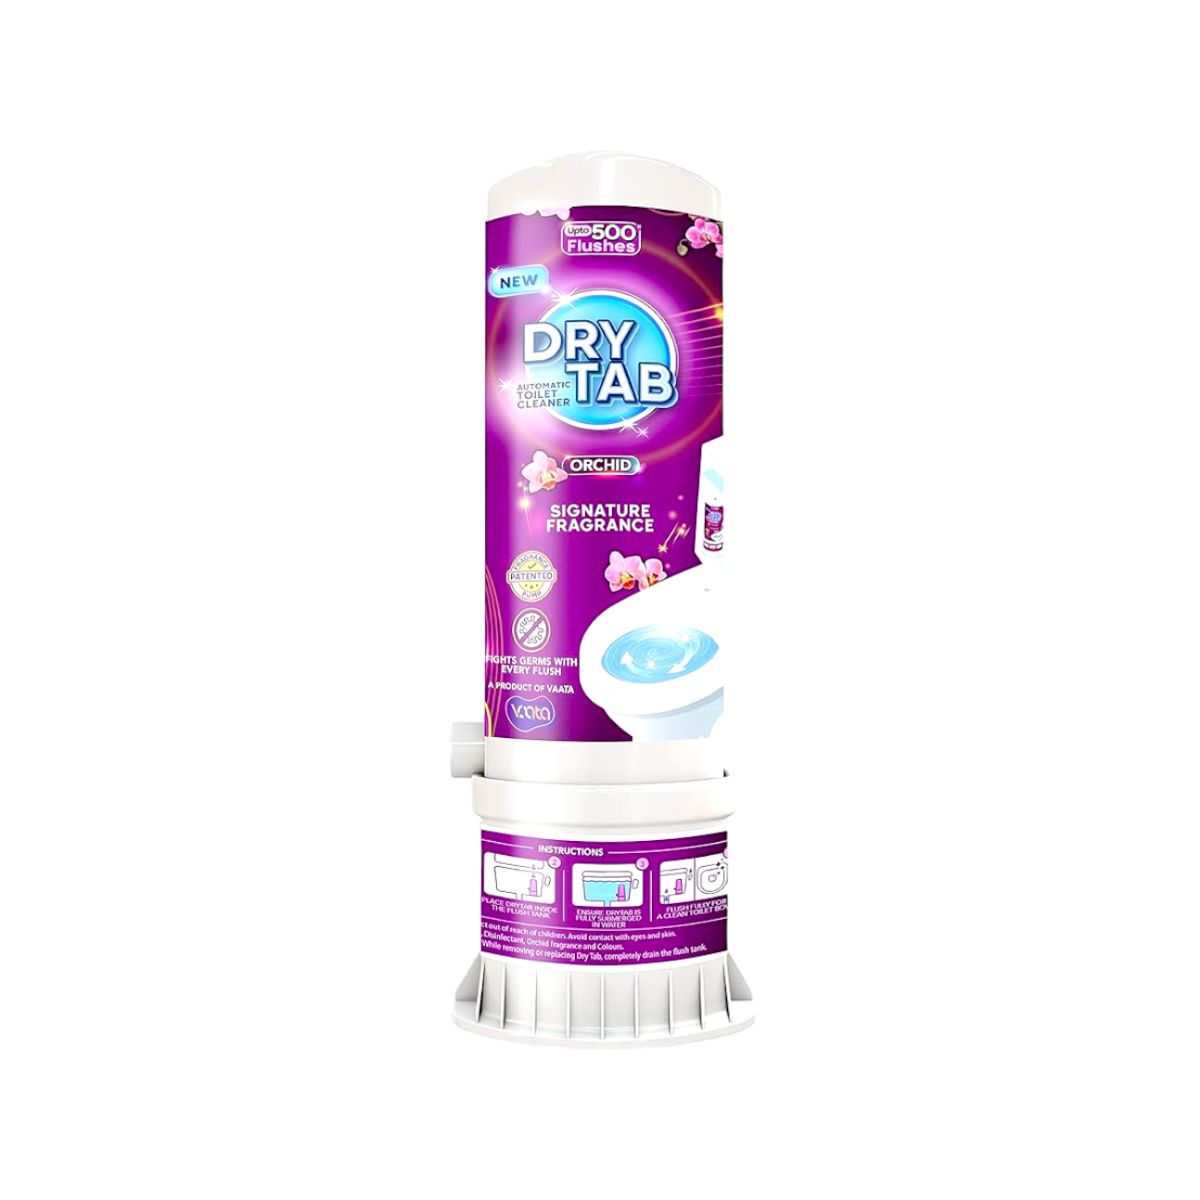 Vaata Dry Tab Automatic Toilet Cleaner - Signature Fragnance - Orchid - Upto 500 Flushes - 170g